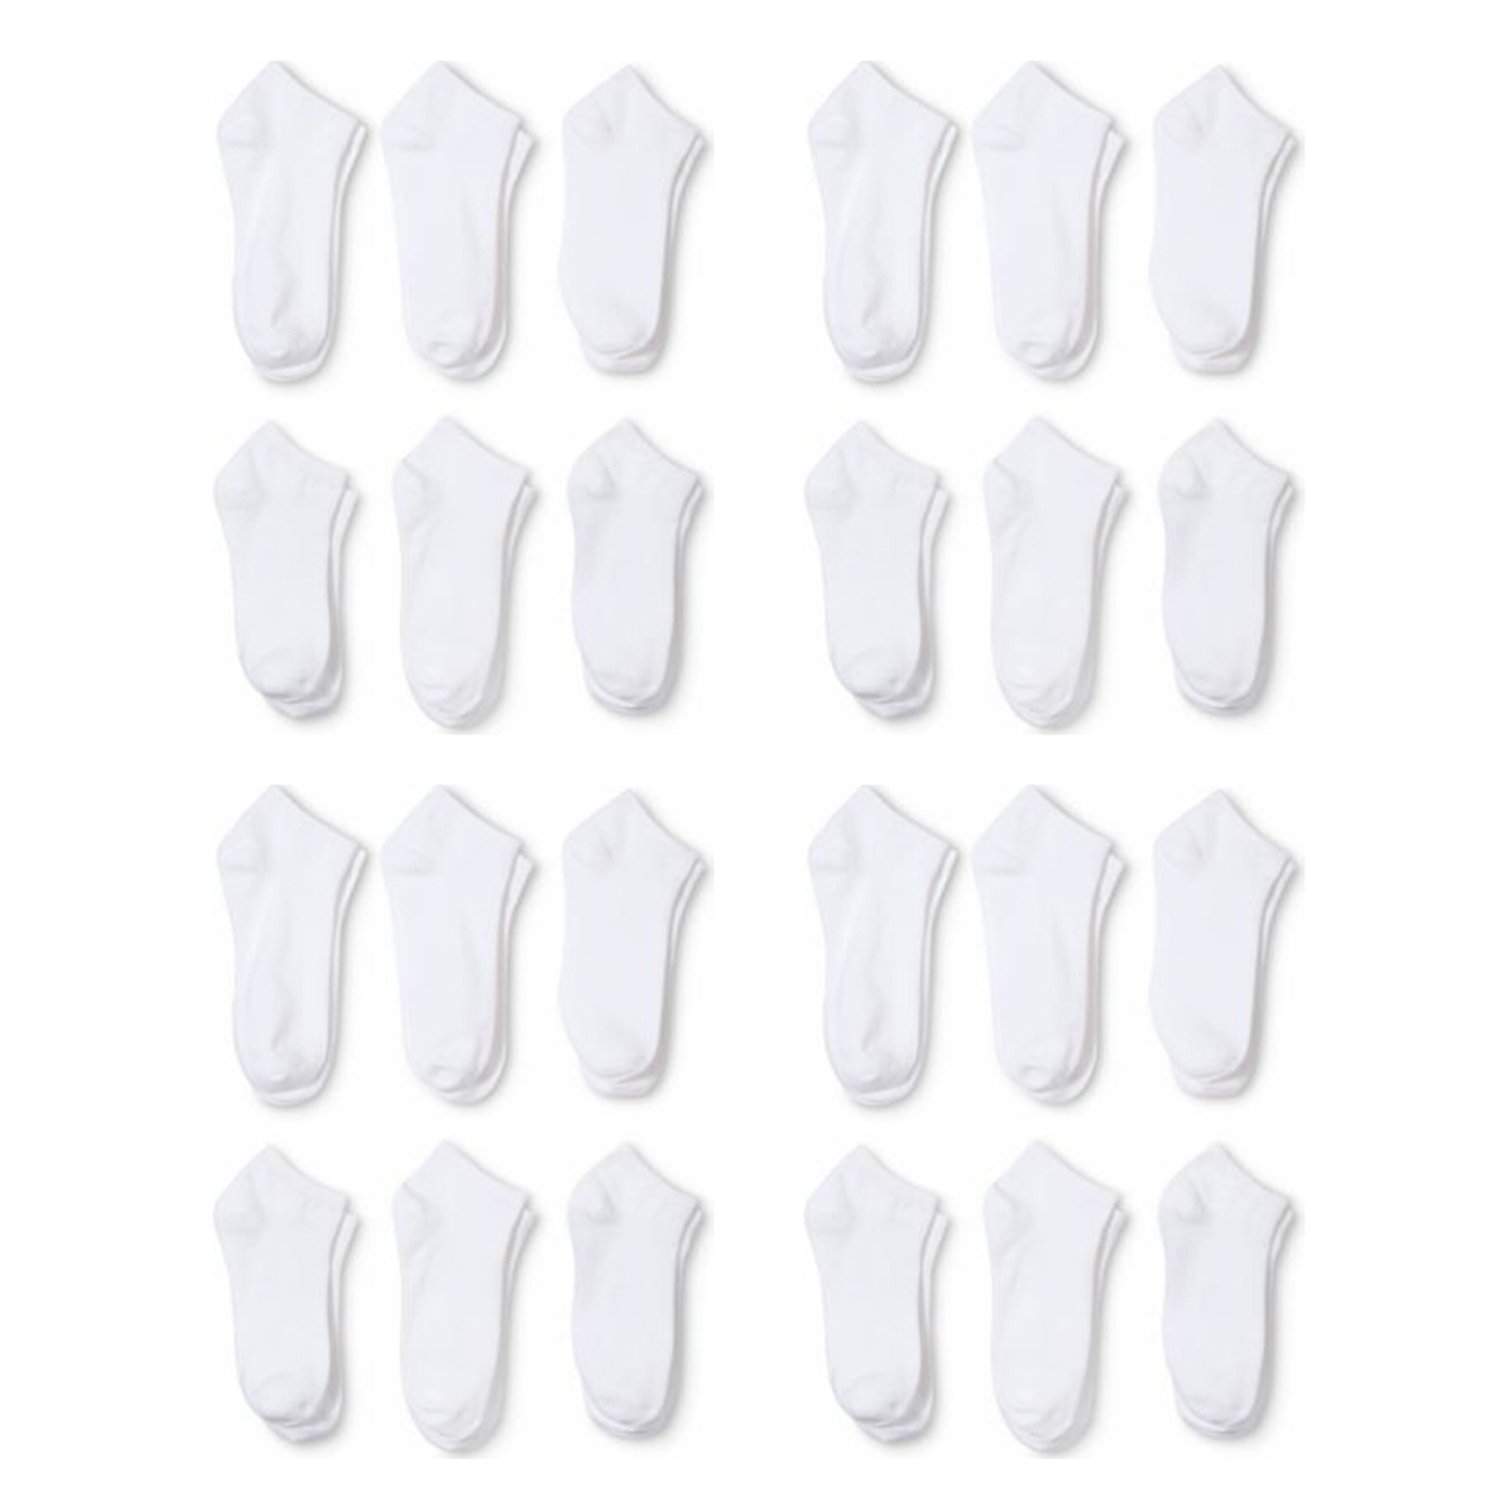 24 Pairs Men Low Cut Socks 9-11 or 6-8 Black or White or Mixed